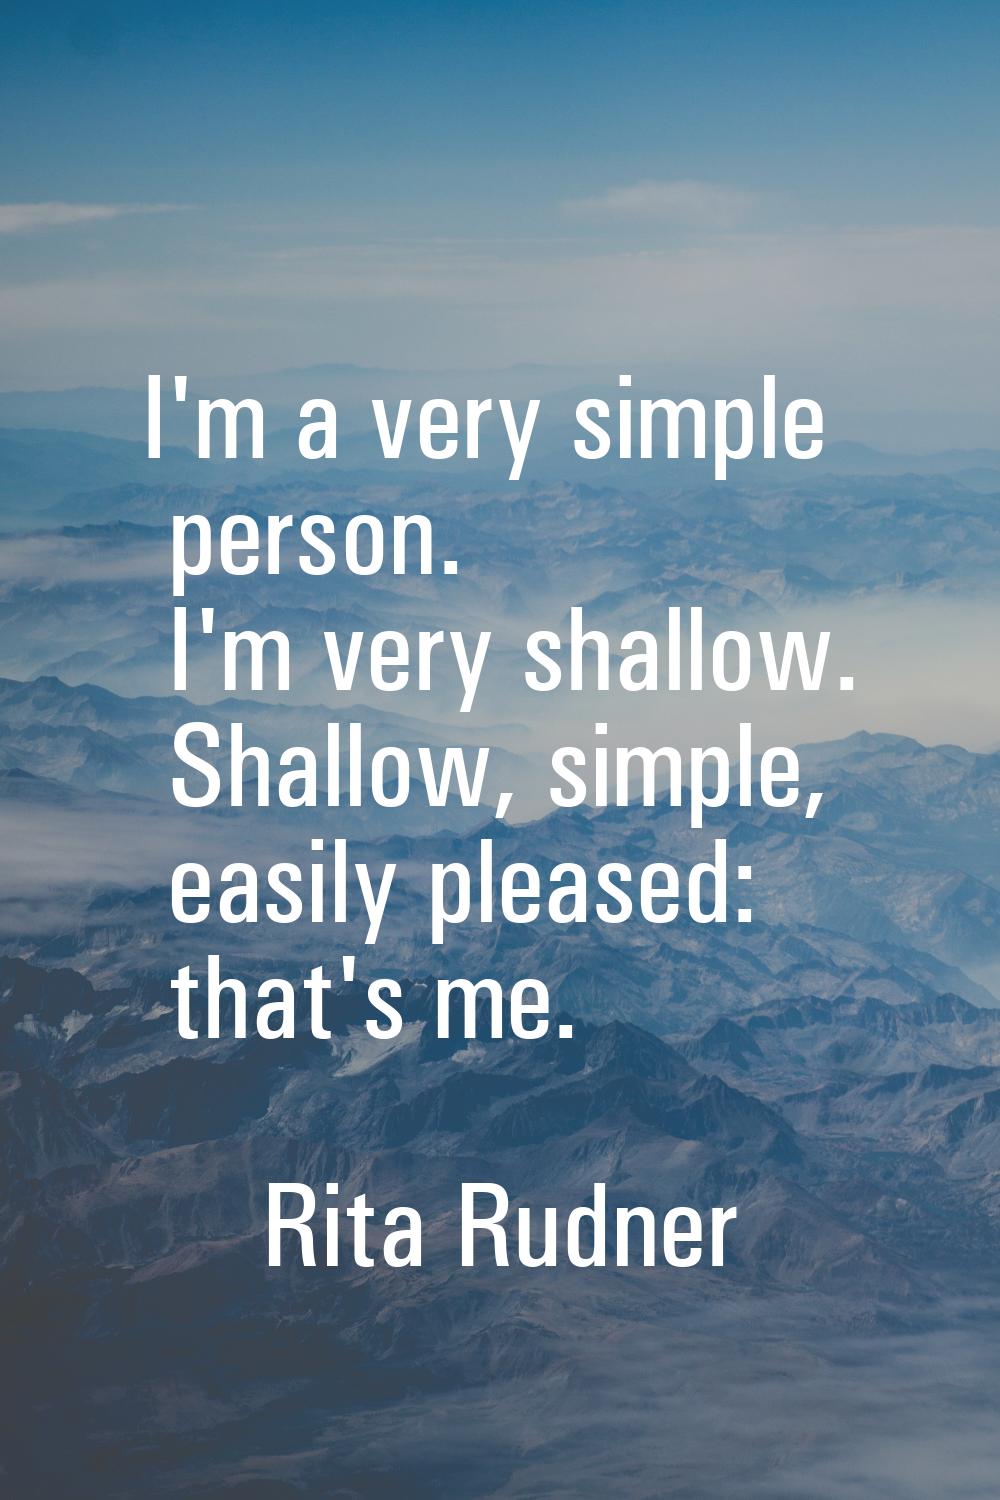 I'm a very simple person. I'm very shallow. Shallow, simple, easily pleased: that's me.